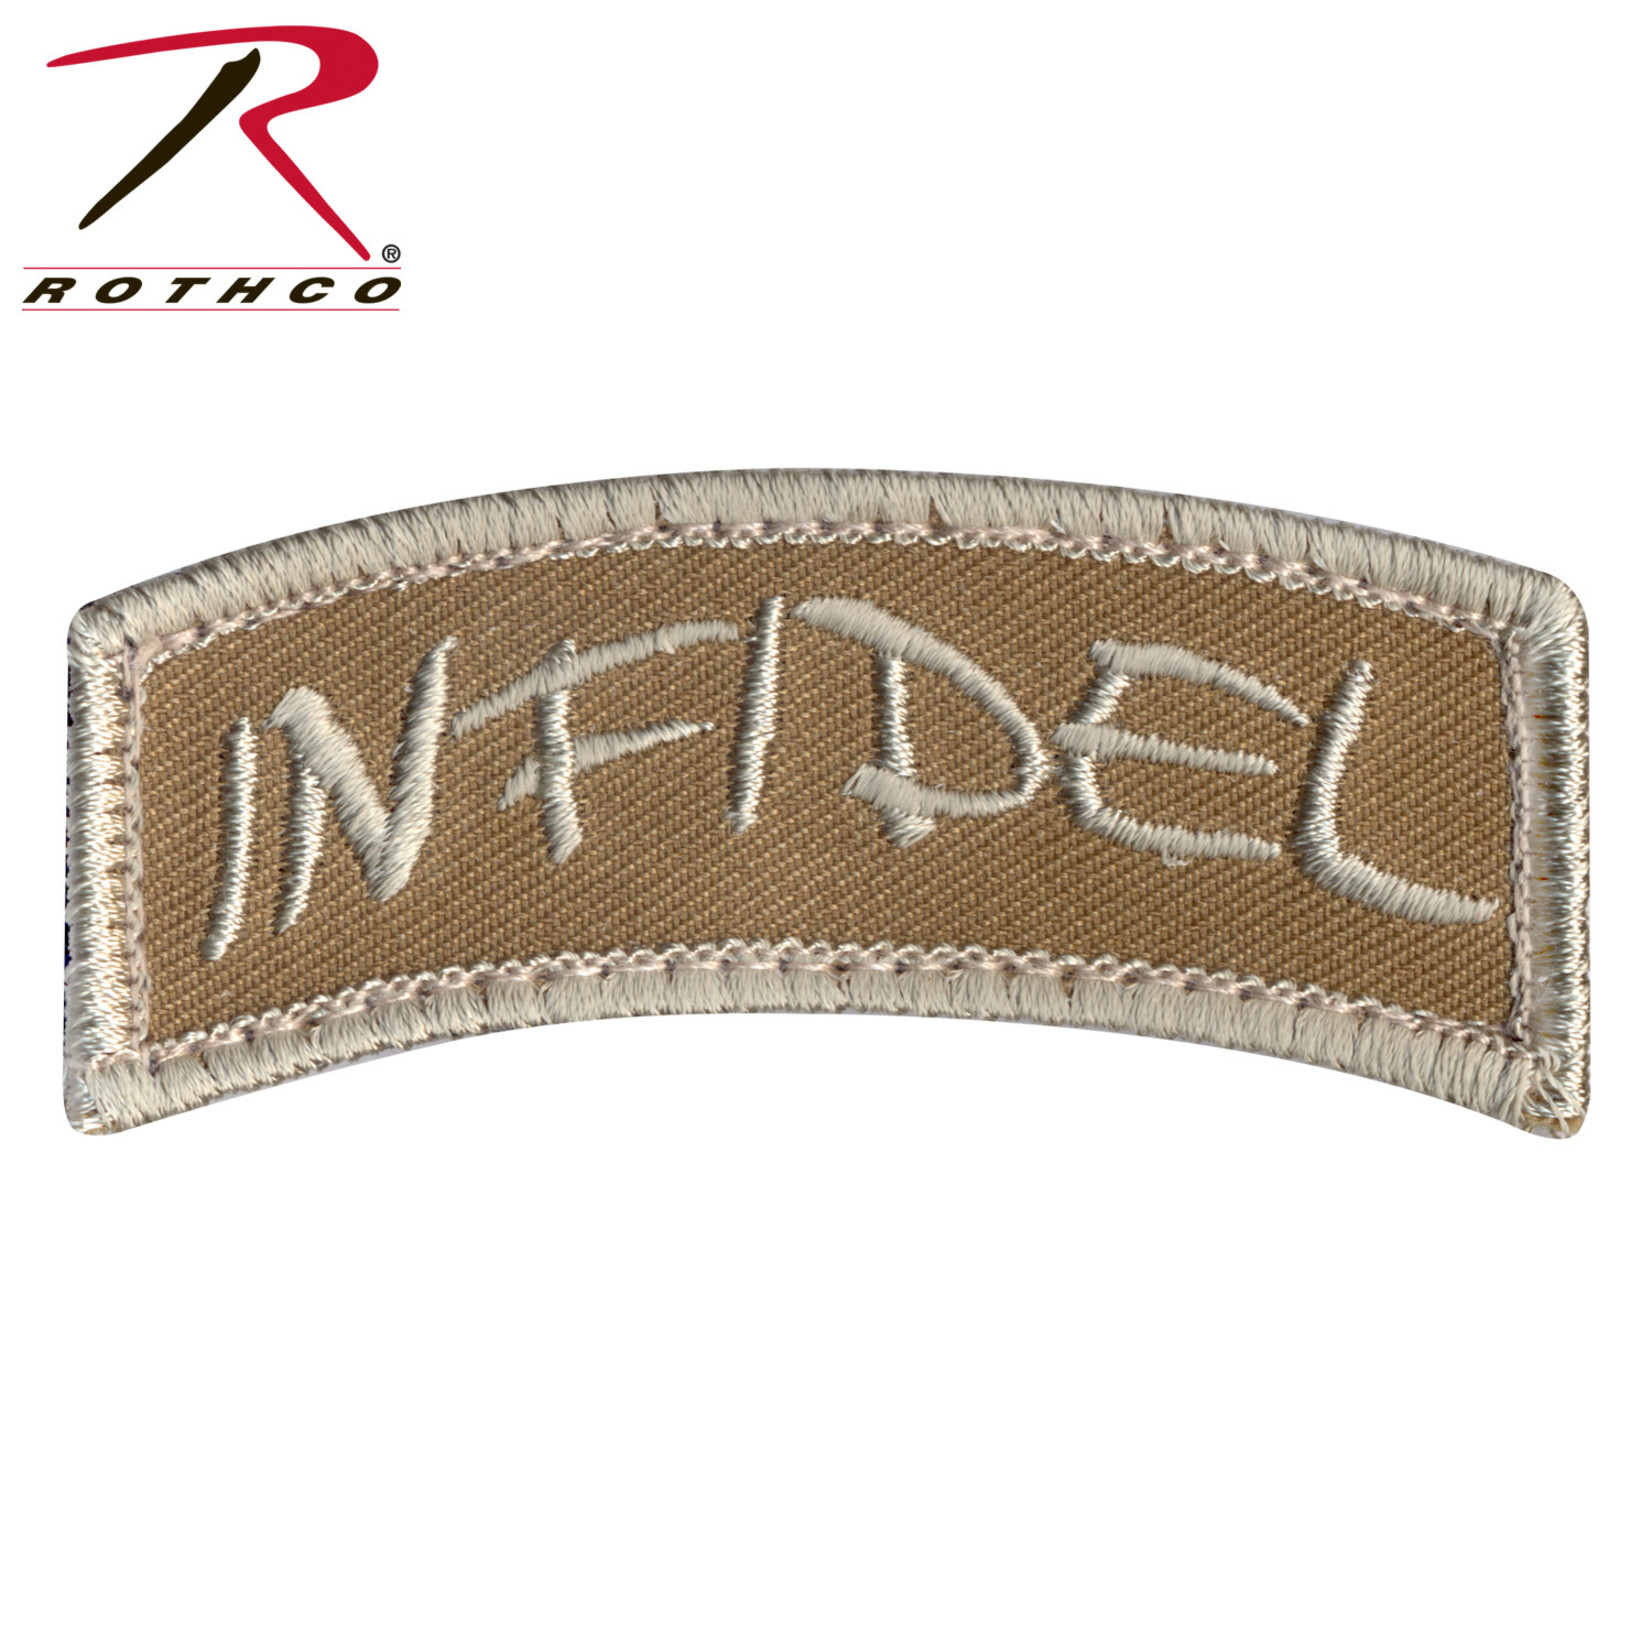 Rothco Infidel Curved Velcro Morale Patch